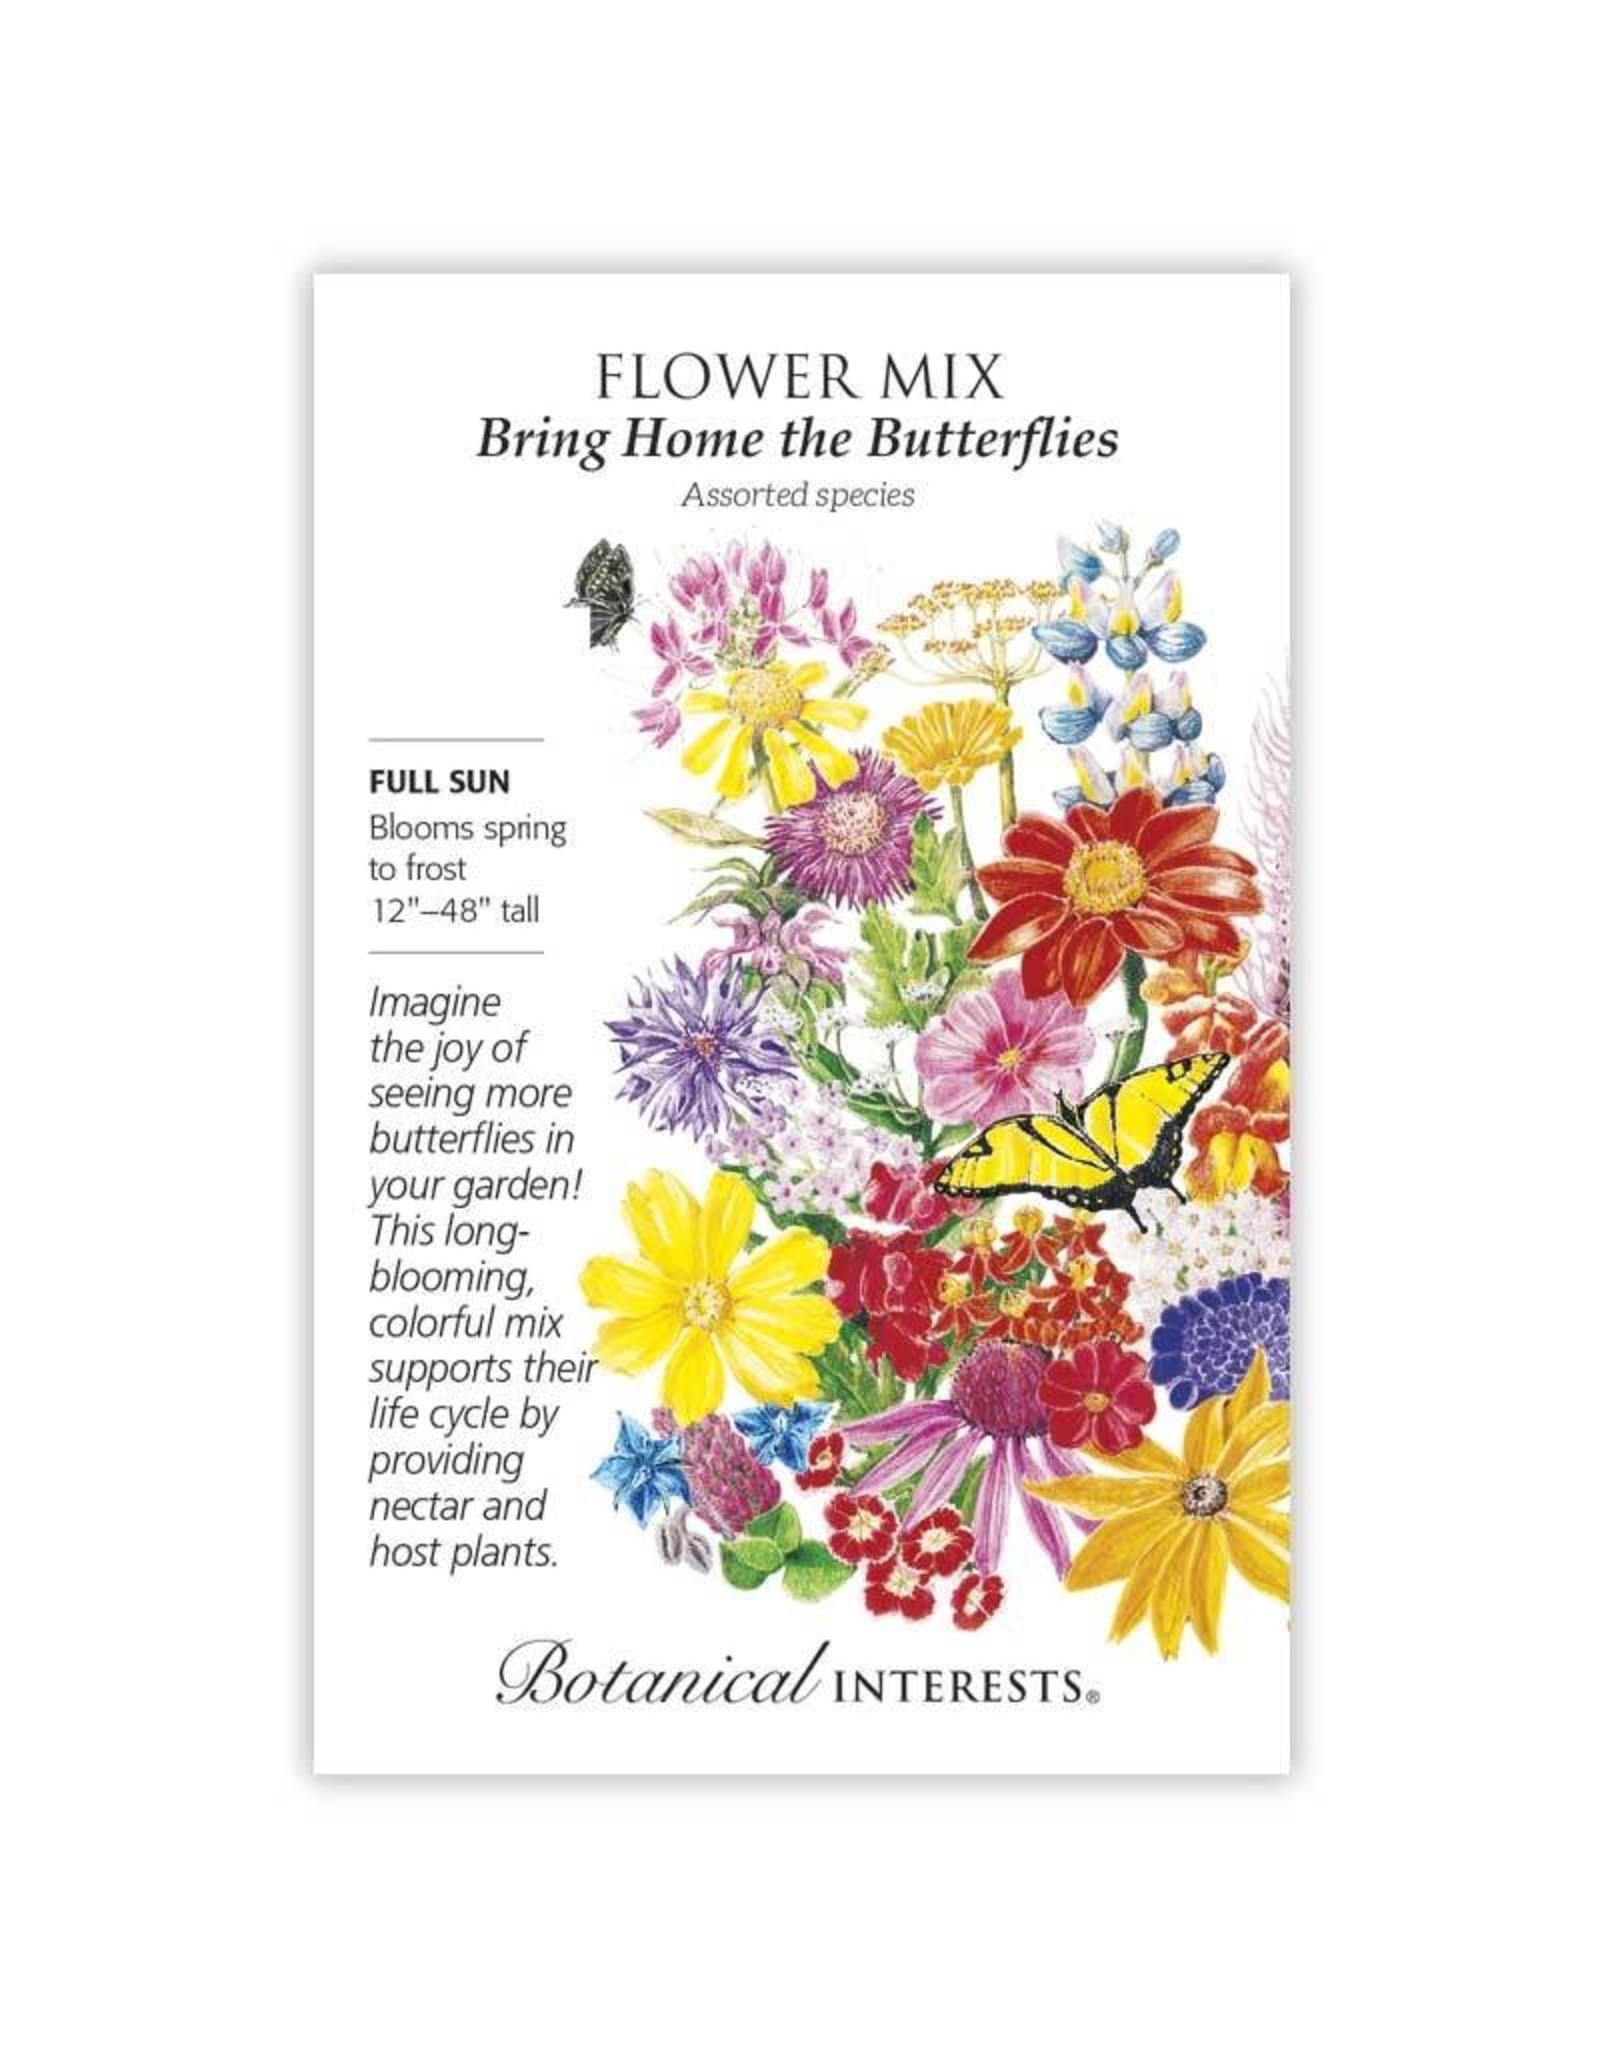 Seeds - Flower Mix Bring Home the Butterflies, Large